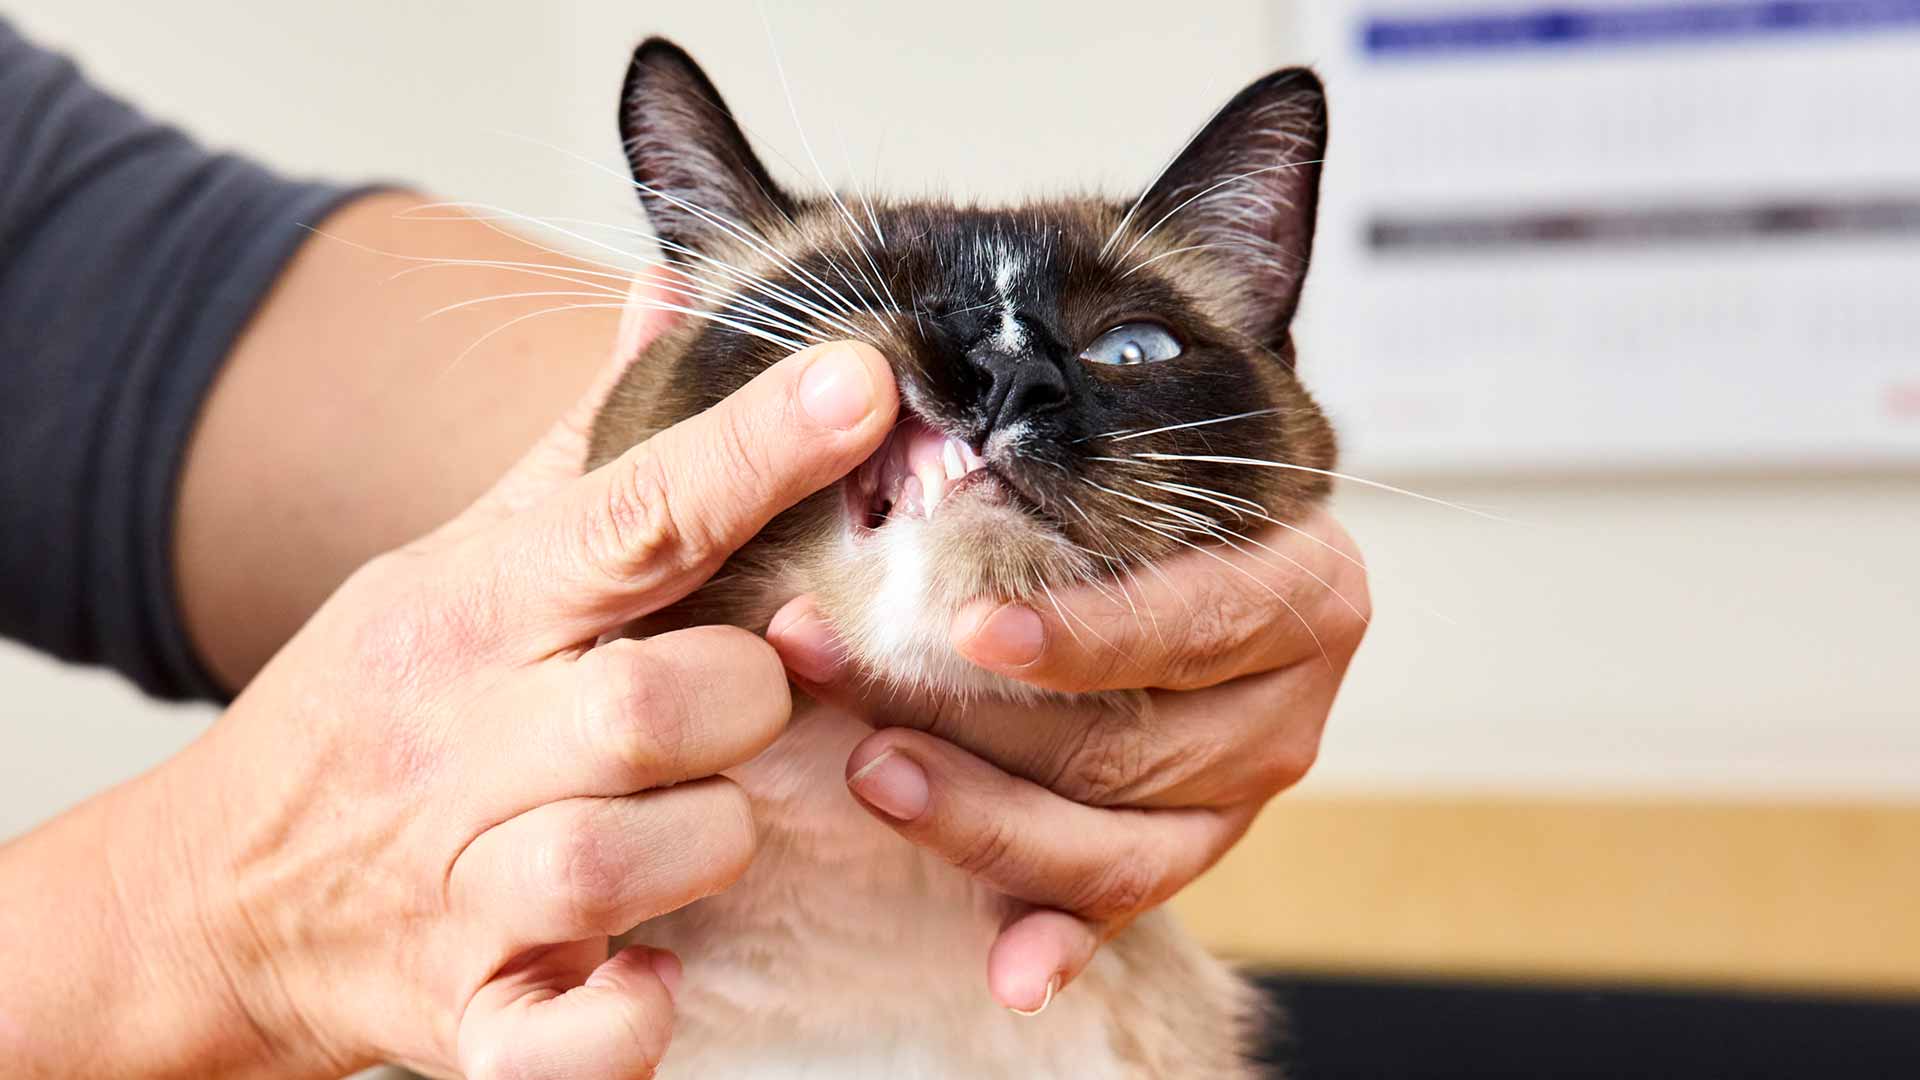 A veterinarian examines the teeth of a Siamese cat